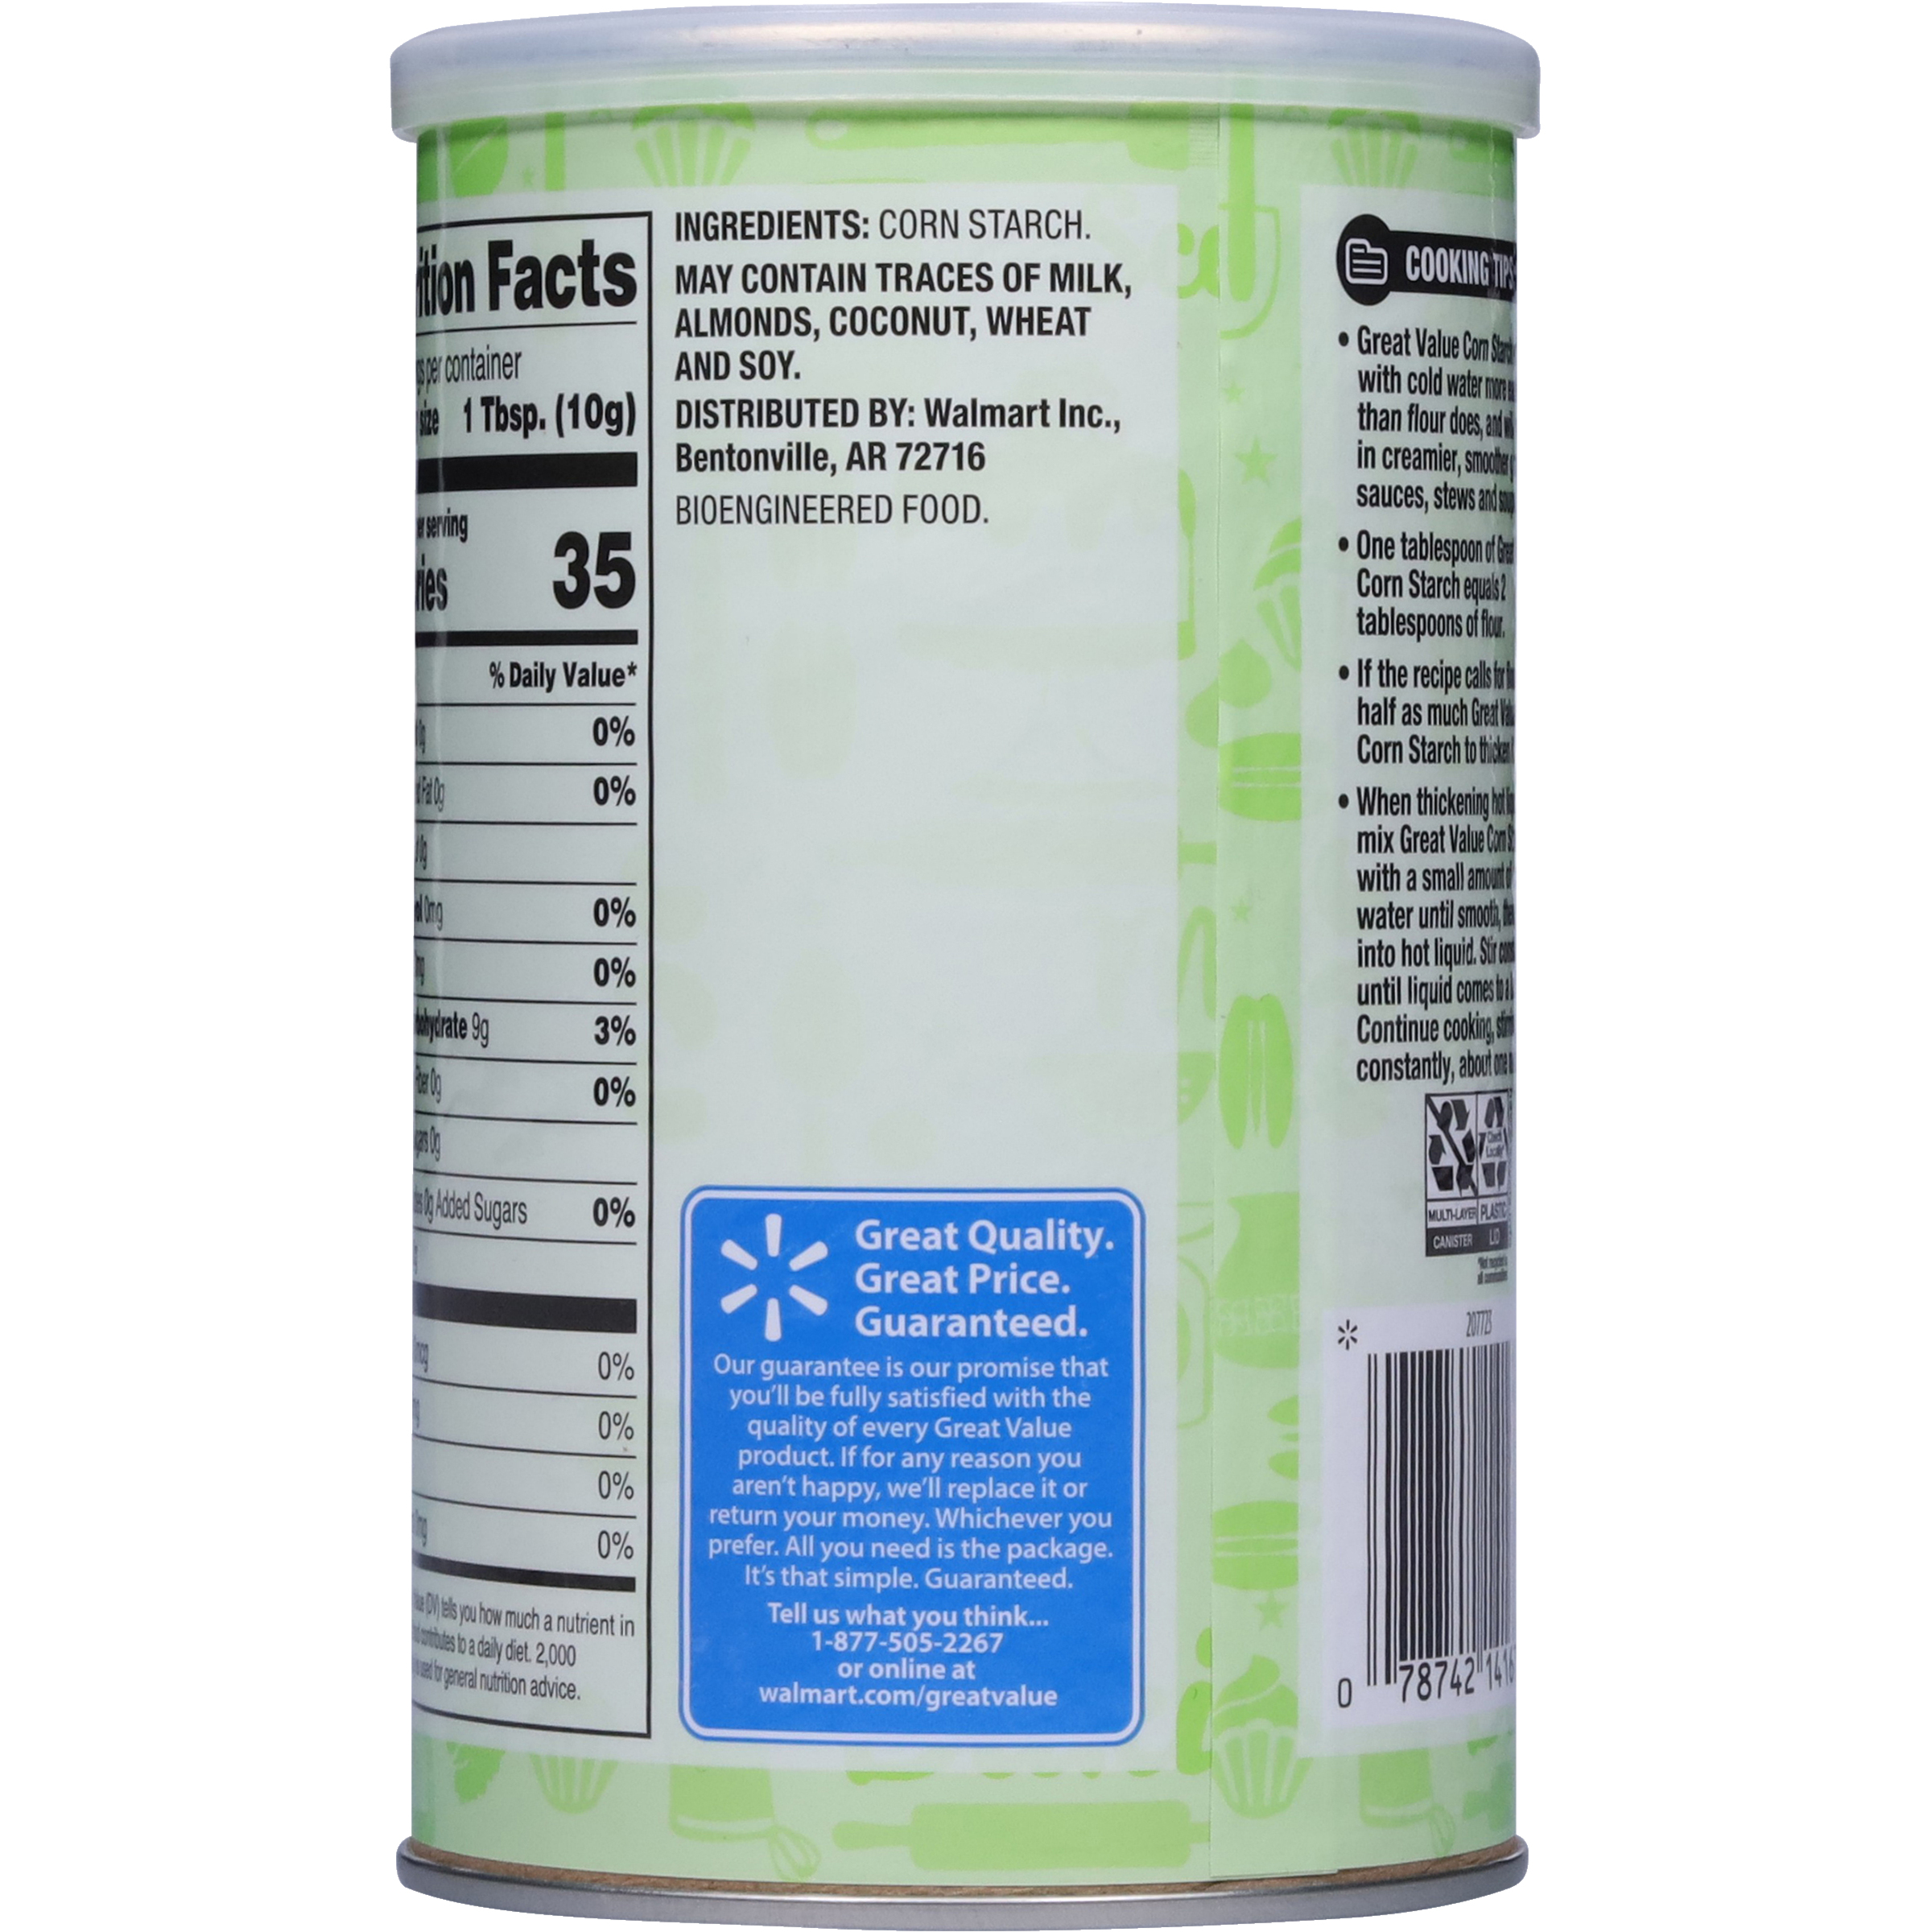 Great Value Corn Starch, 16 oz - image 5 of 8